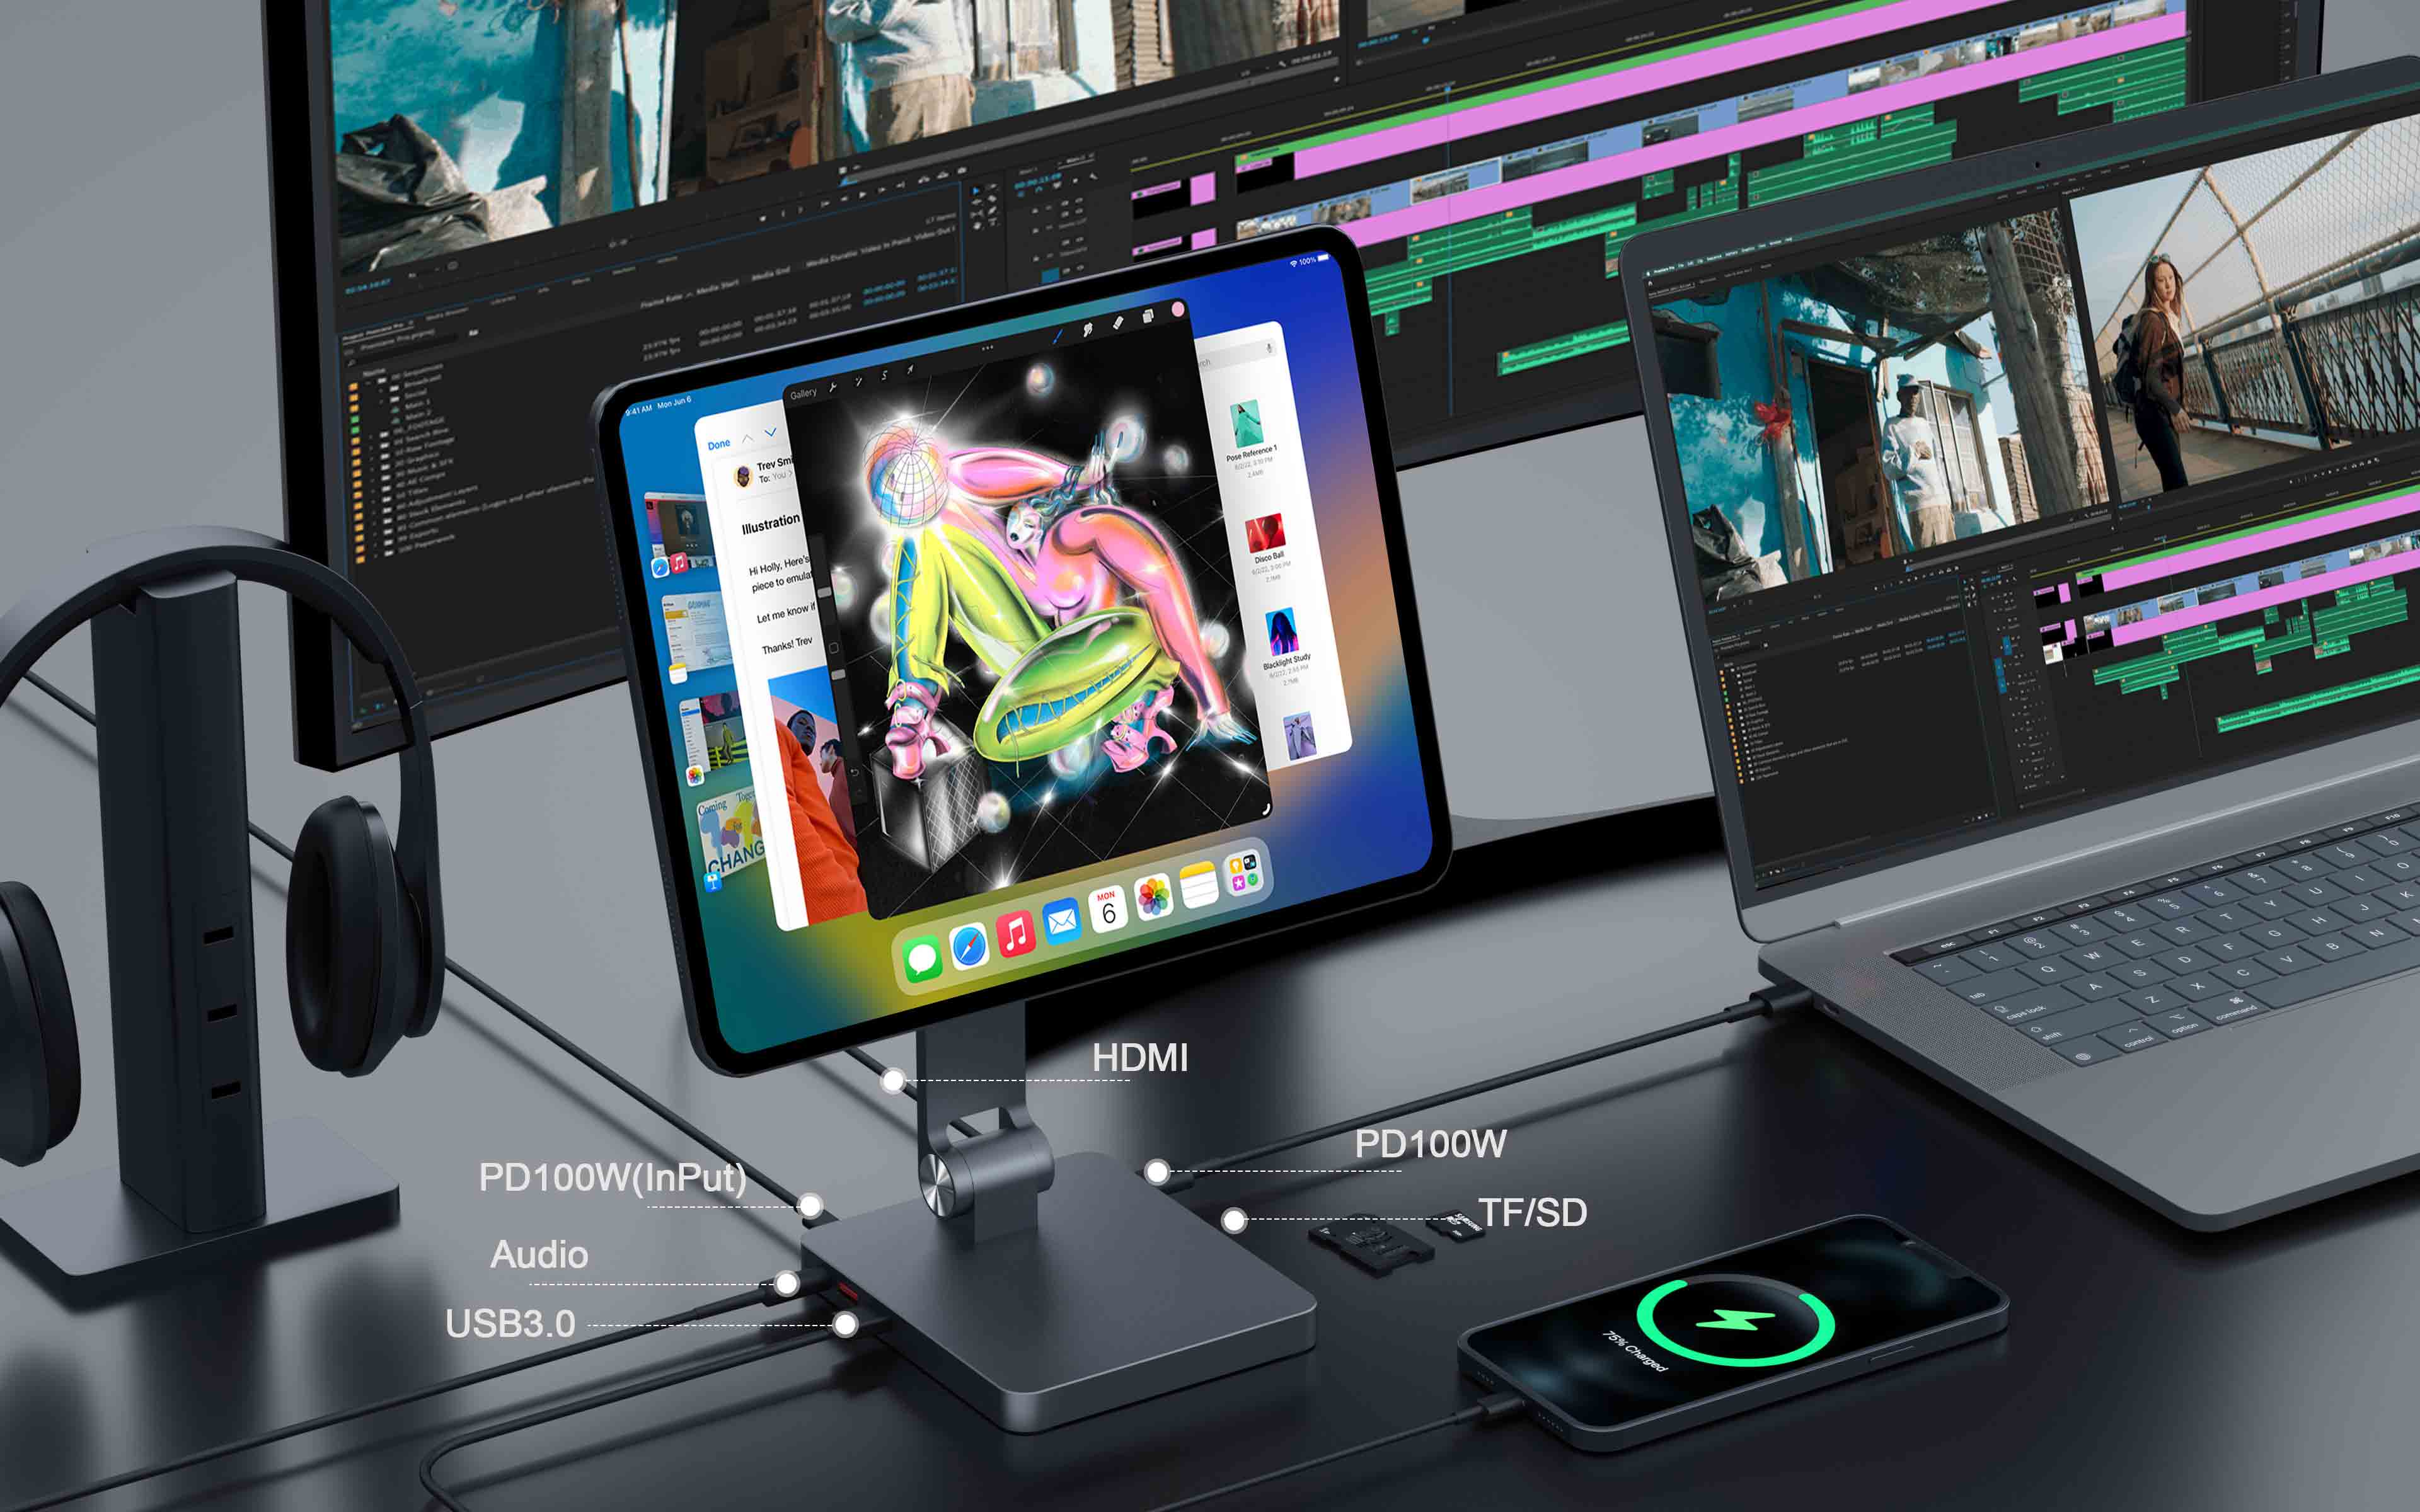 ipad-dock-stand-hub-powerful-features-make-it-easy-to-do-video-editing-photo-manipulation-and-more